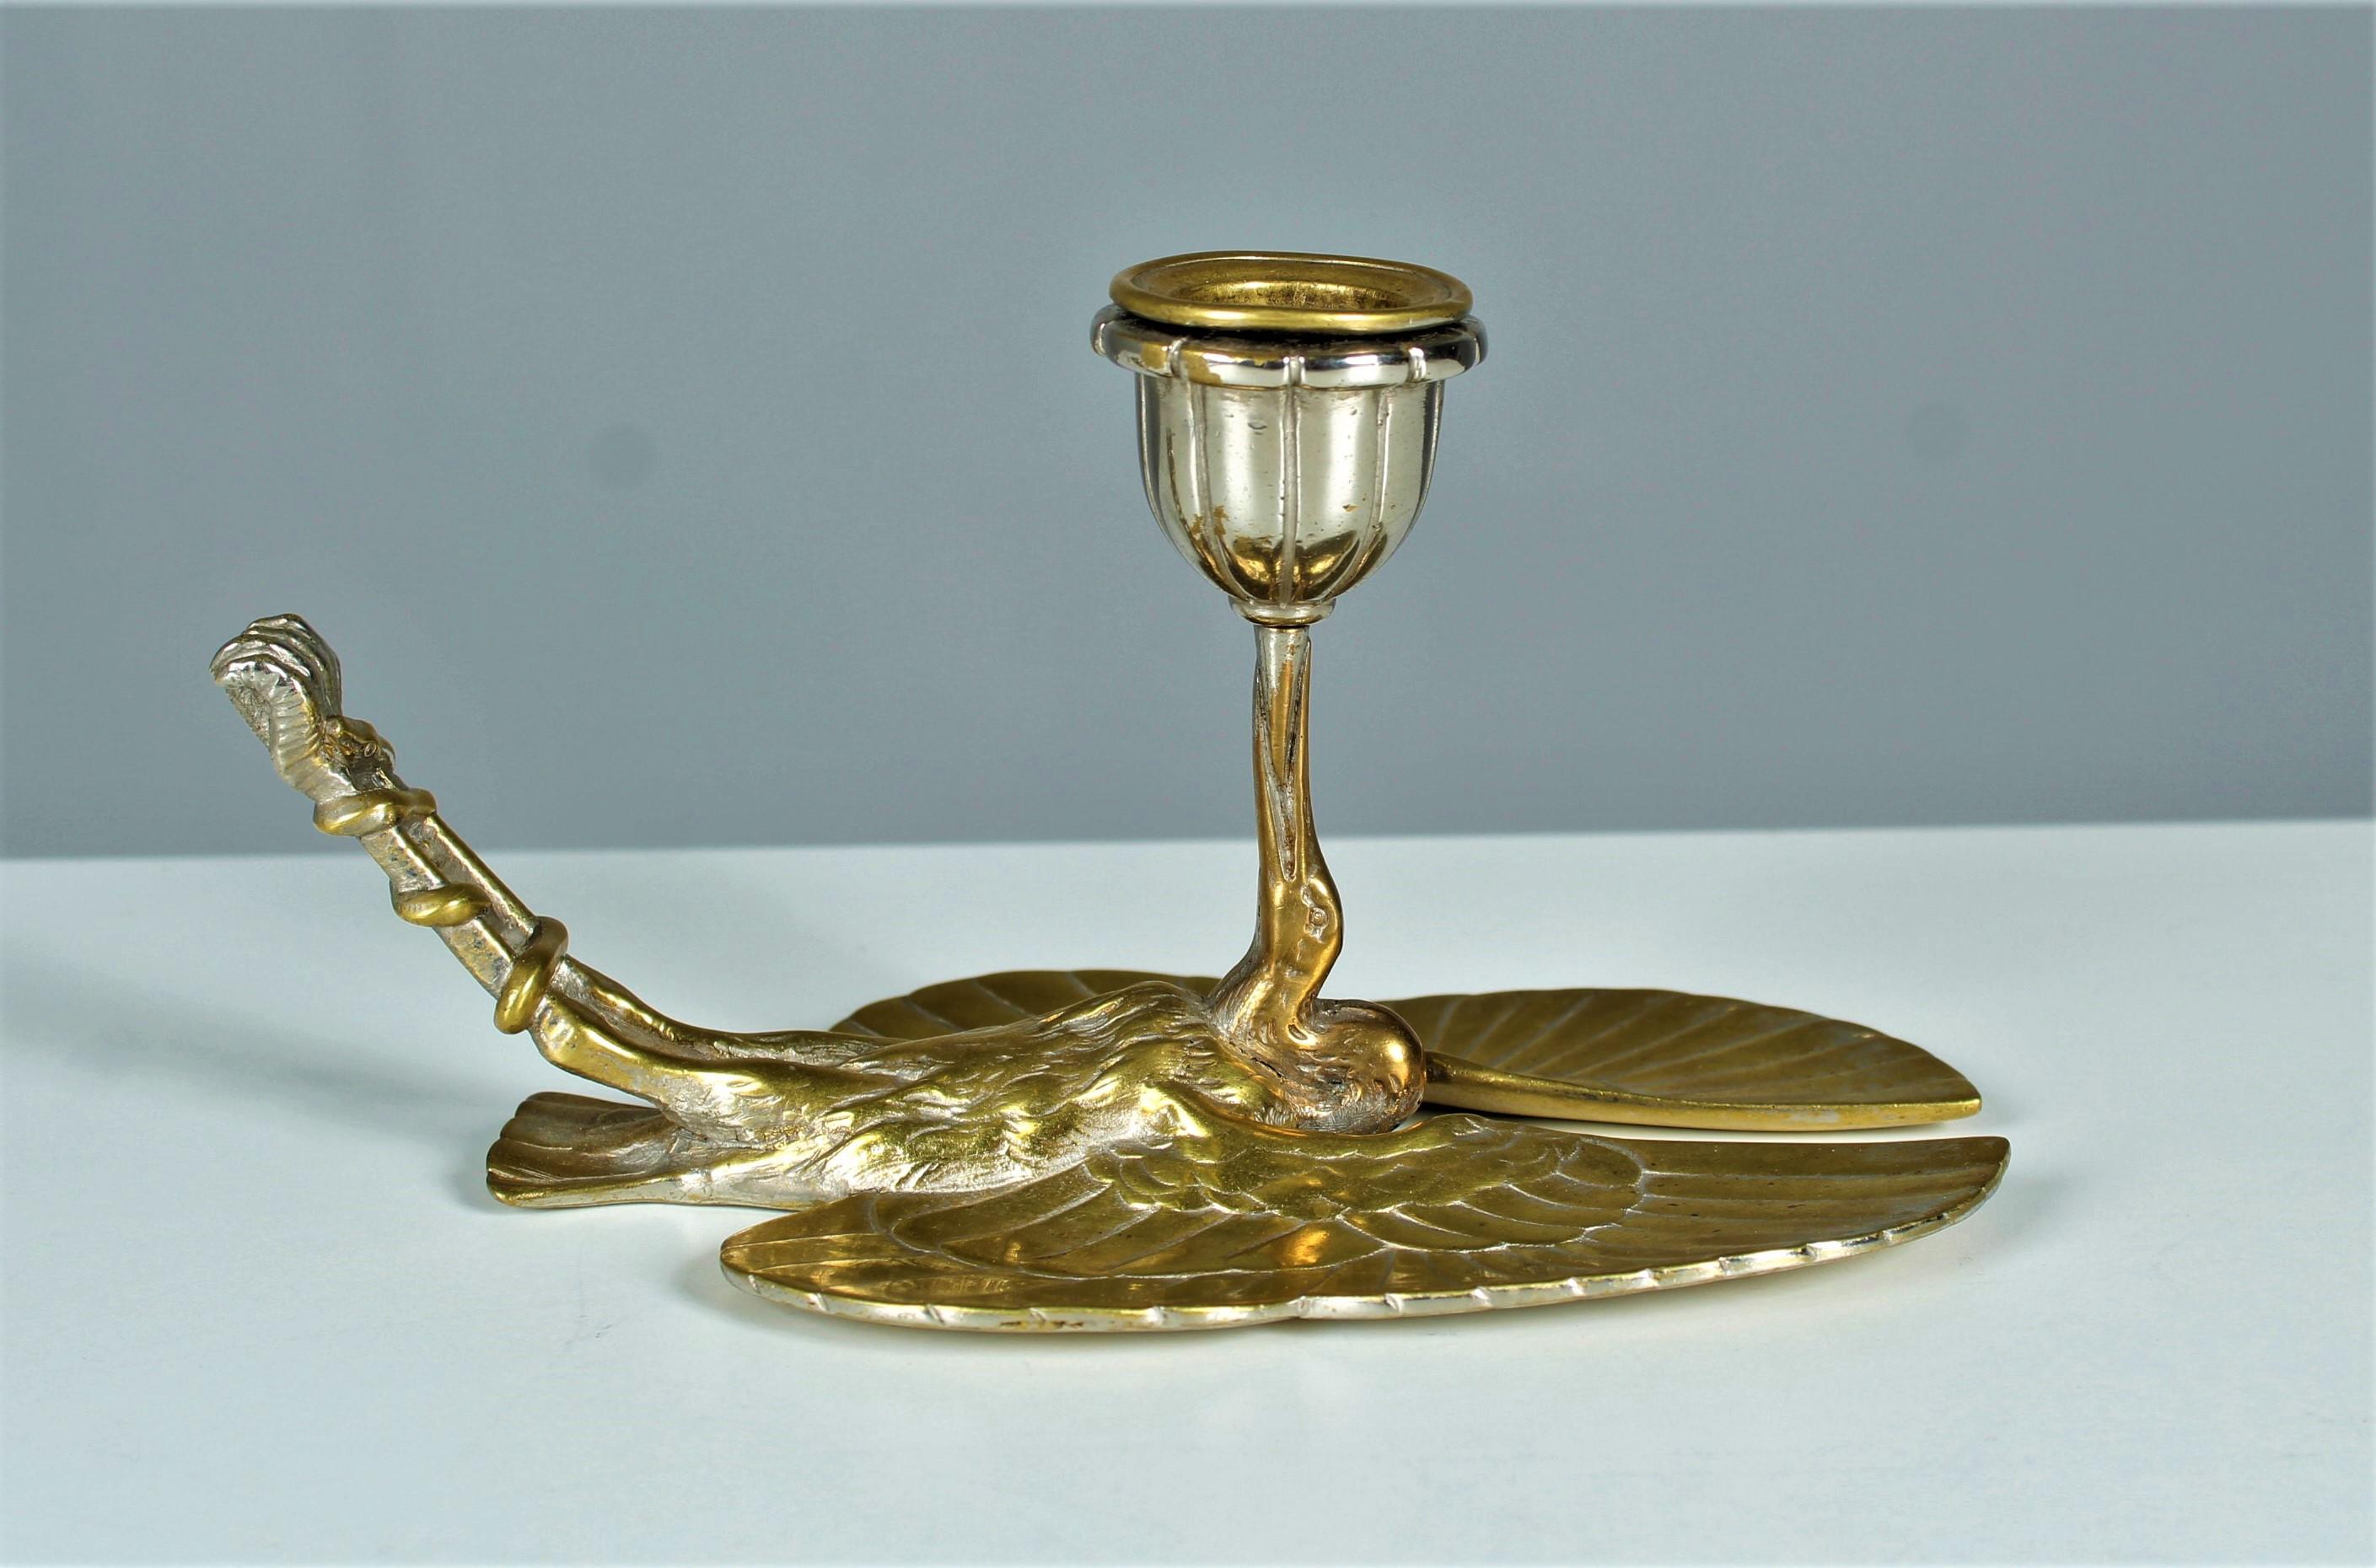 Wonderful unique piece of candleholder.
Beautiful bronze work, nicely chiseled and in a cleaned condition.
Silver plating rubbed.